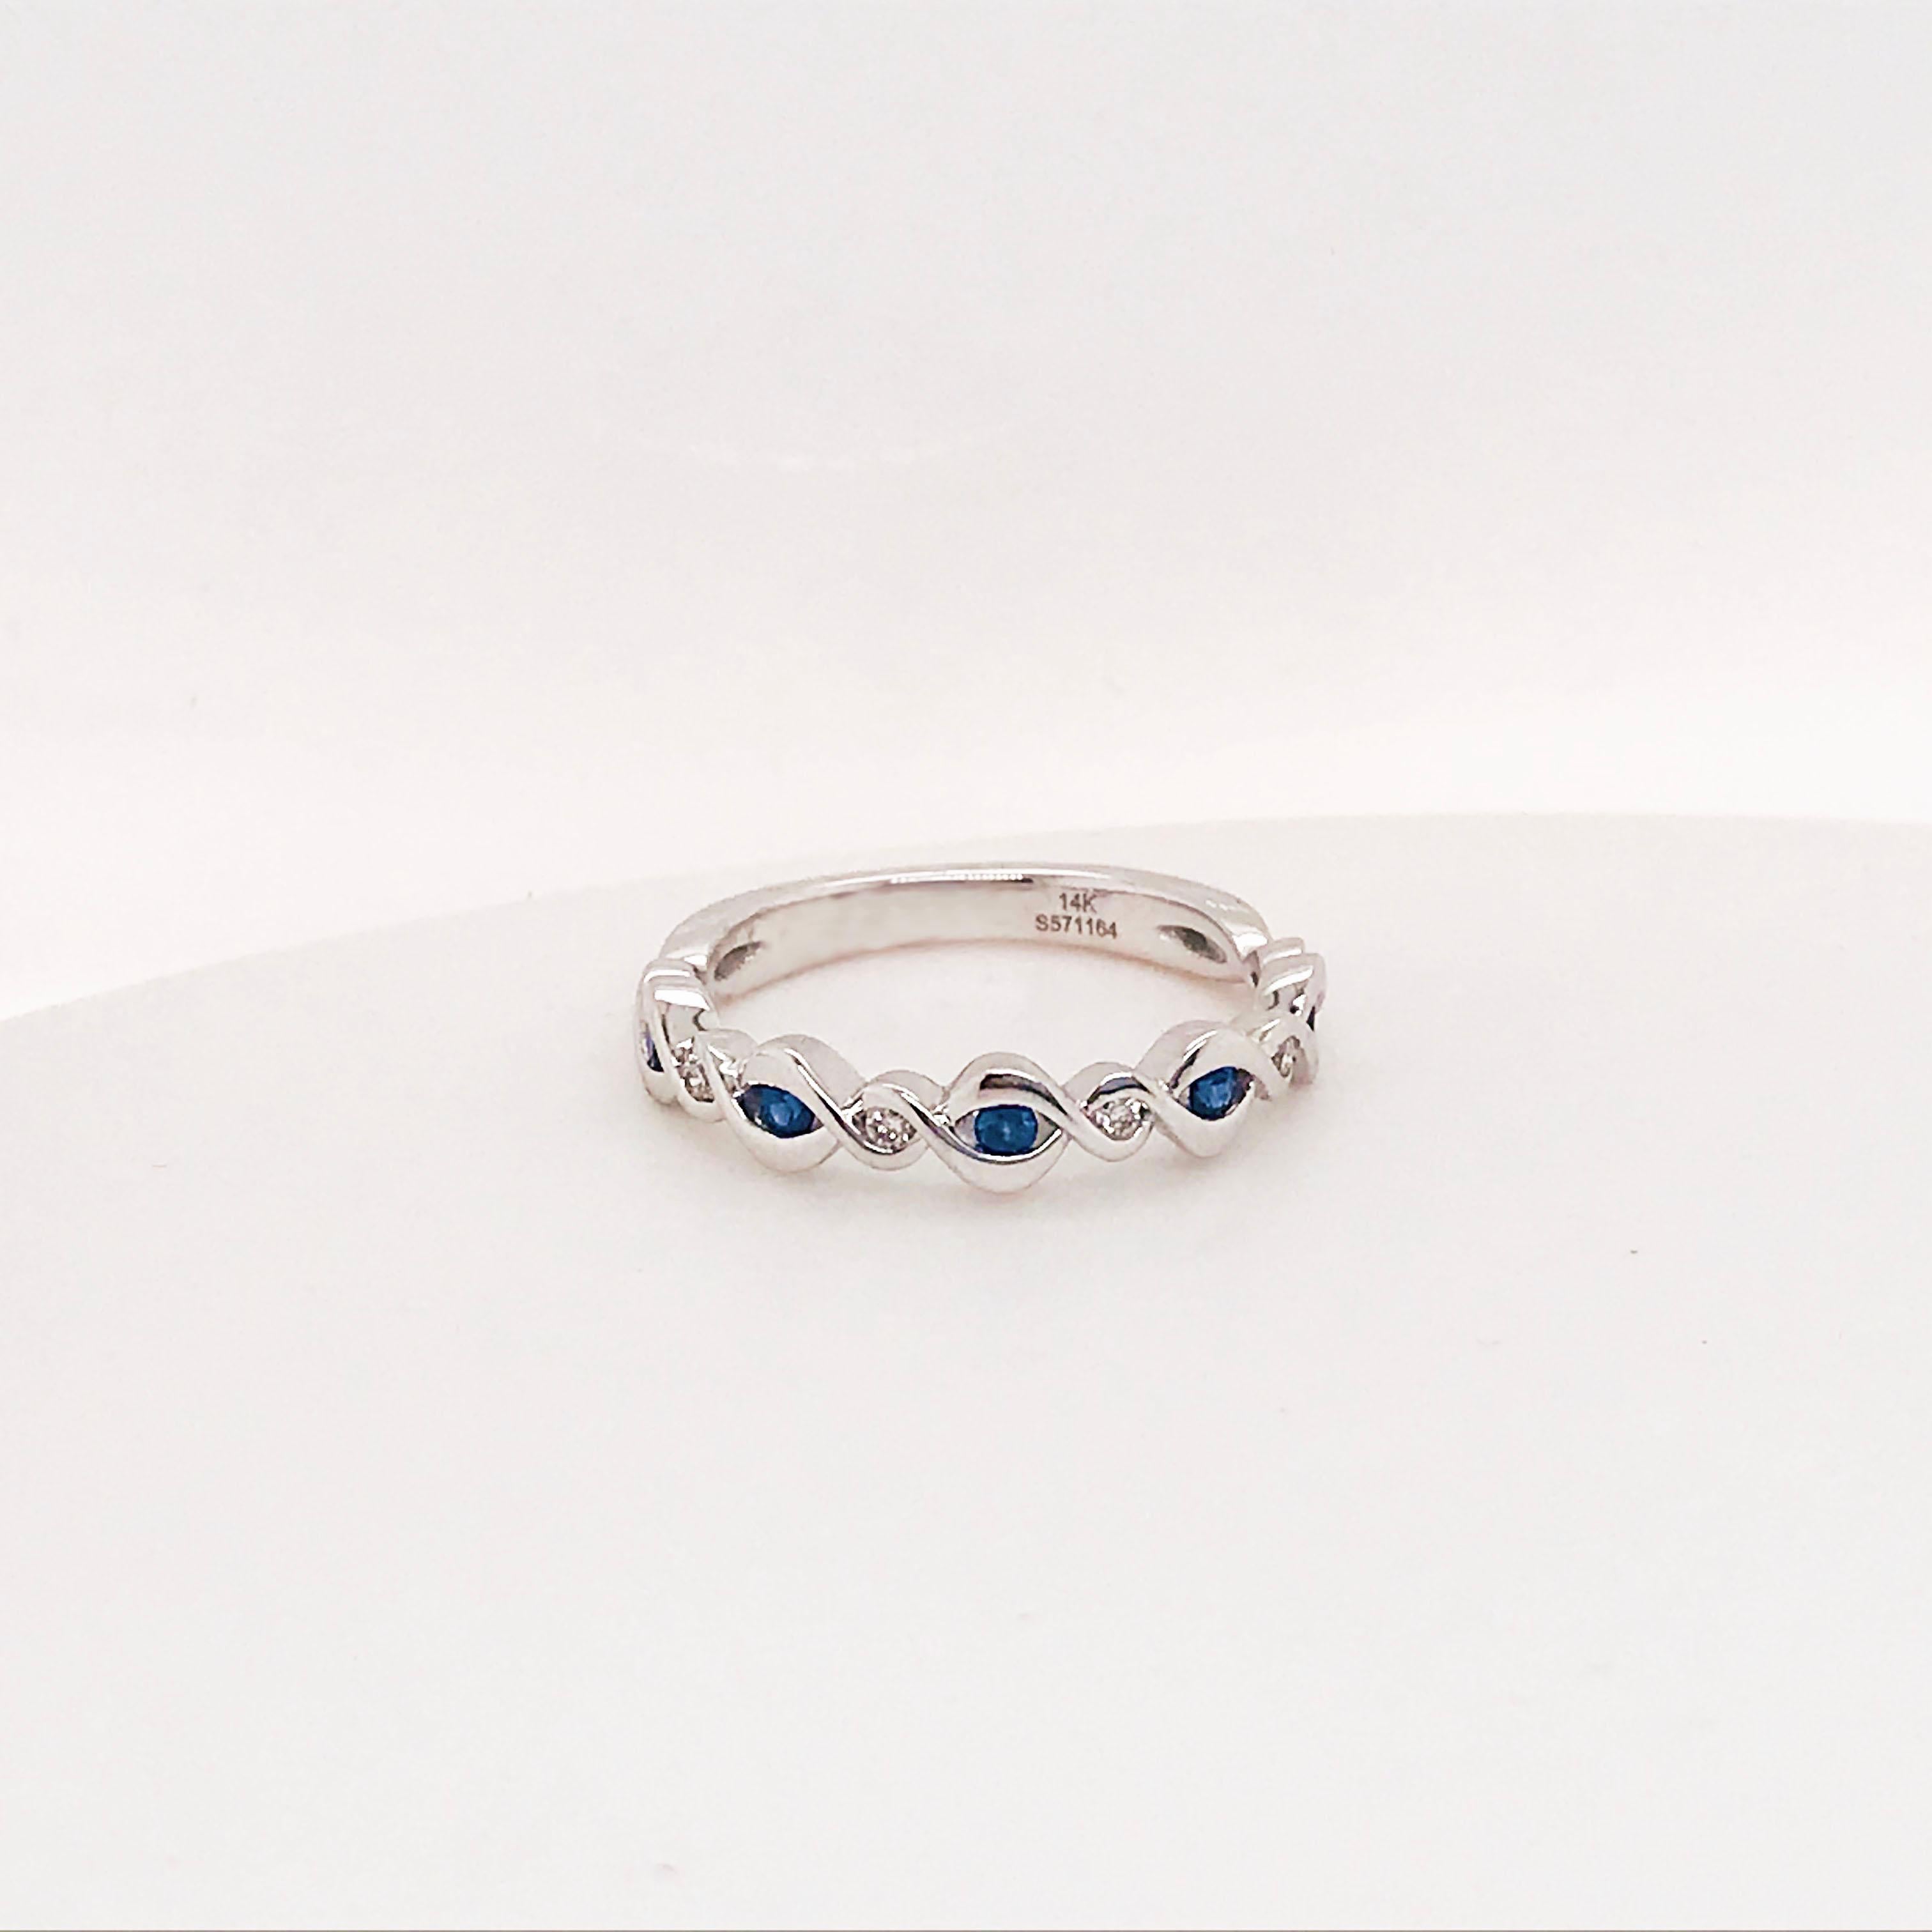 Blue sapphire and diamond band with whimsical forever design! This 14 karat white gold gorgeous band has genuine blue sapphire gemstones and natural round brilliant diamonds alternating in sequence. The blue sapphires and diamonds are set in